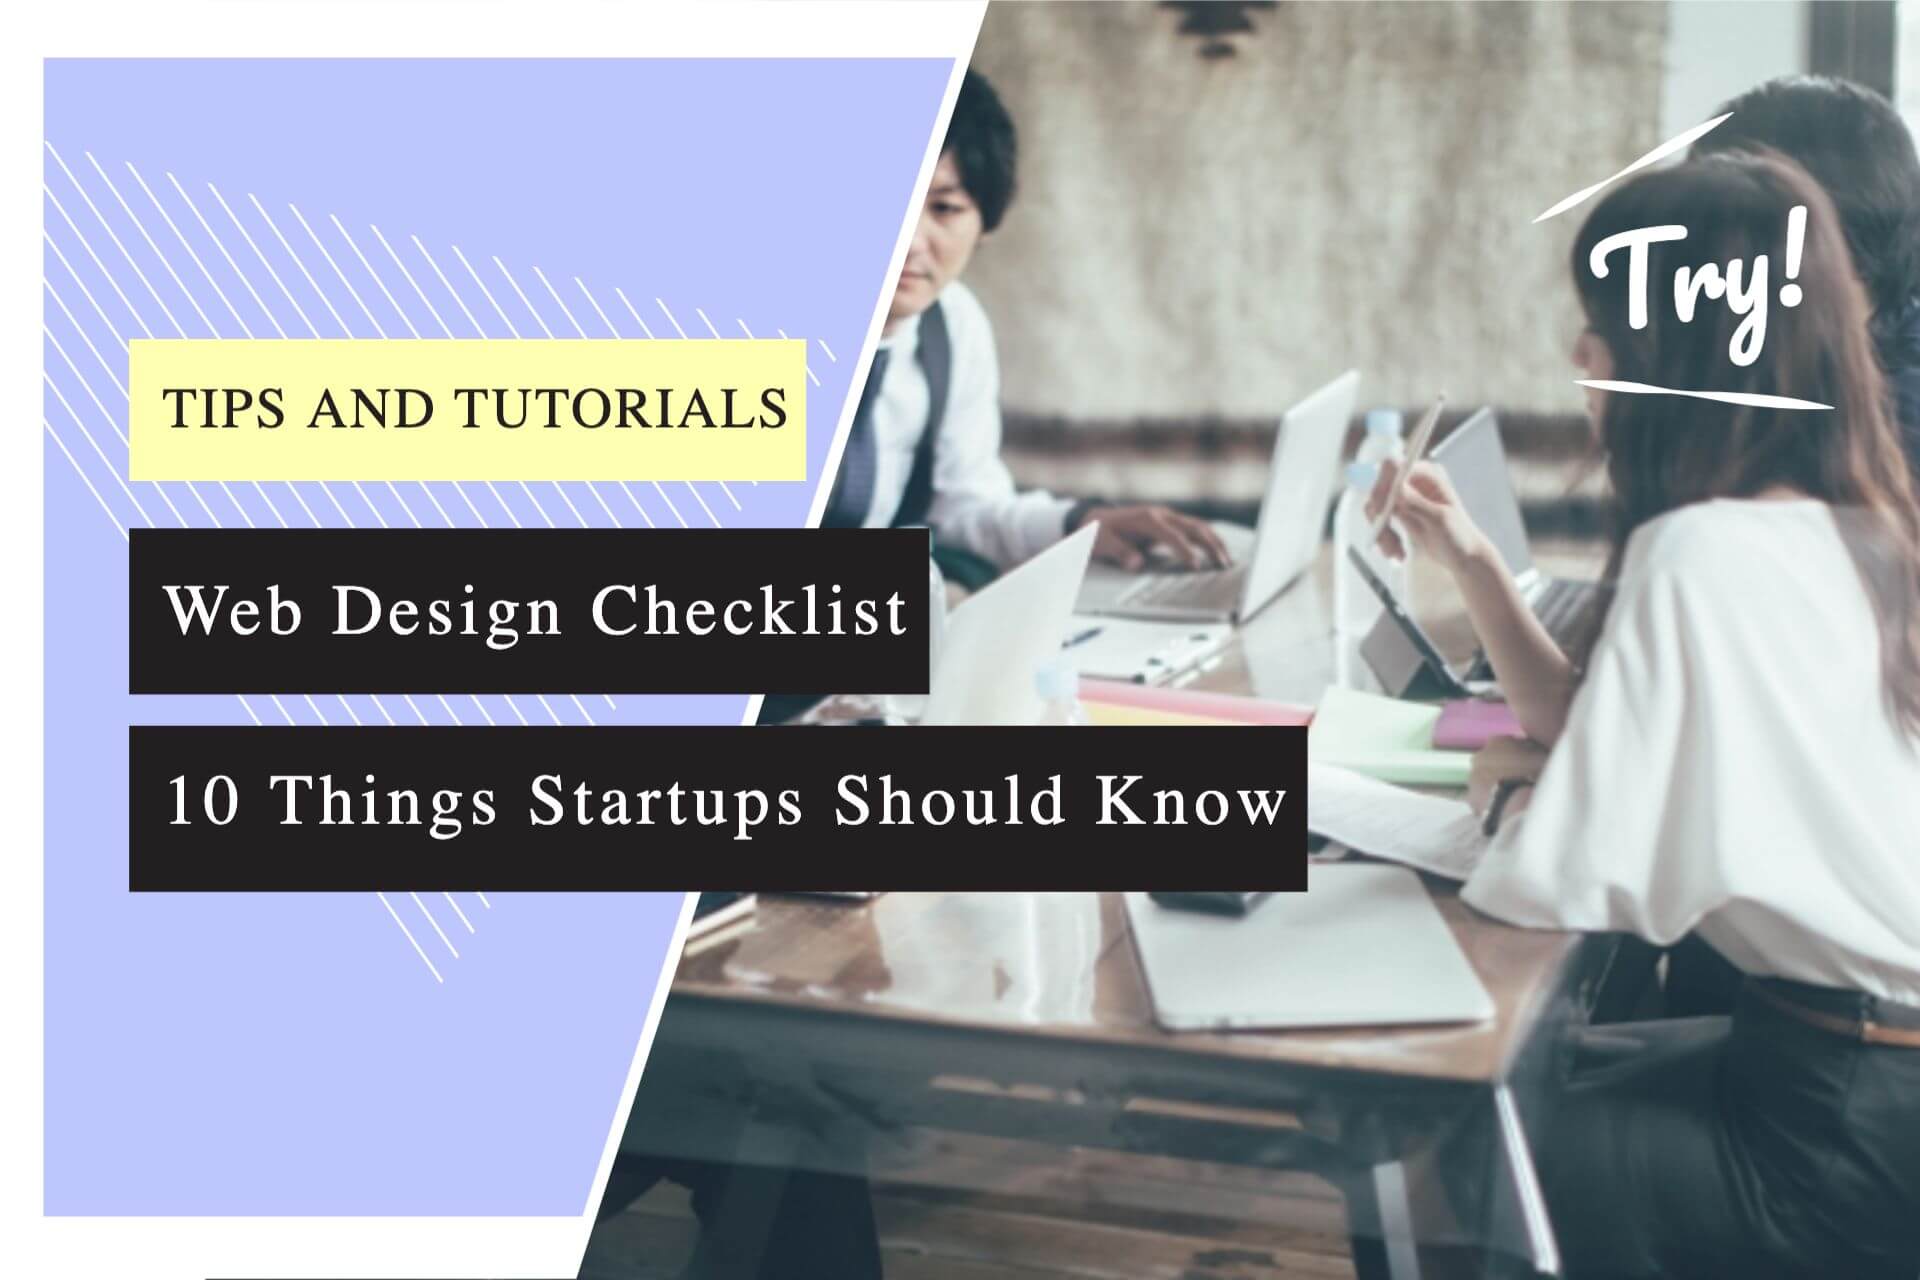 Web Design Checklist: 10 Things Startups Should Know